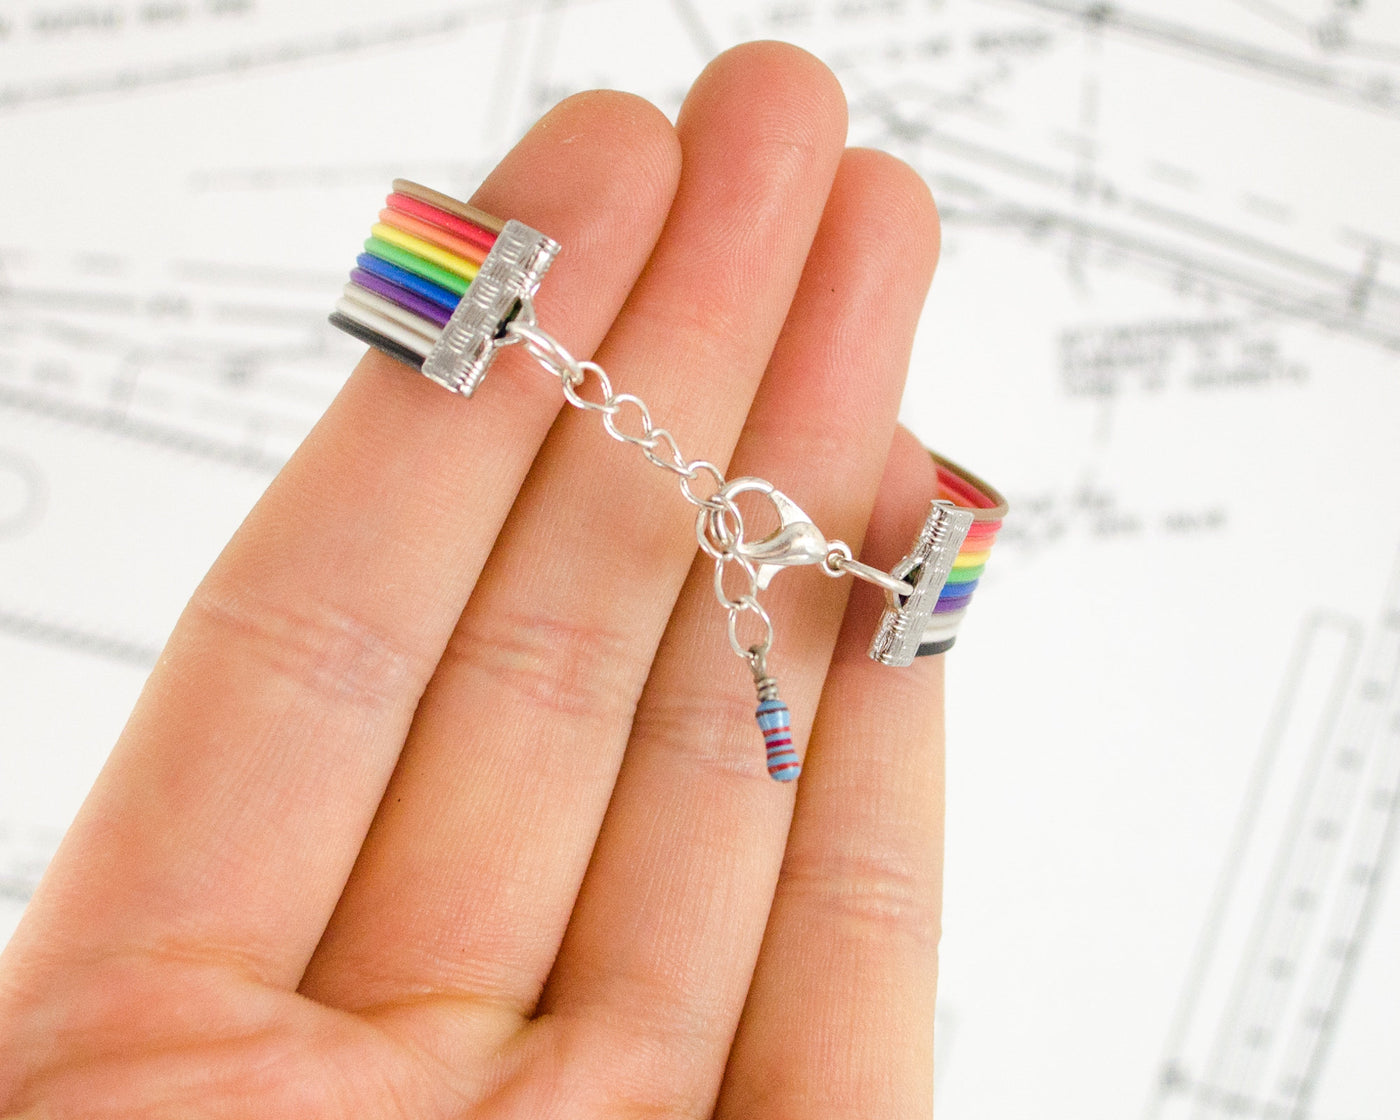 Ribbon Cable Adjustable Bracelet with Resistor